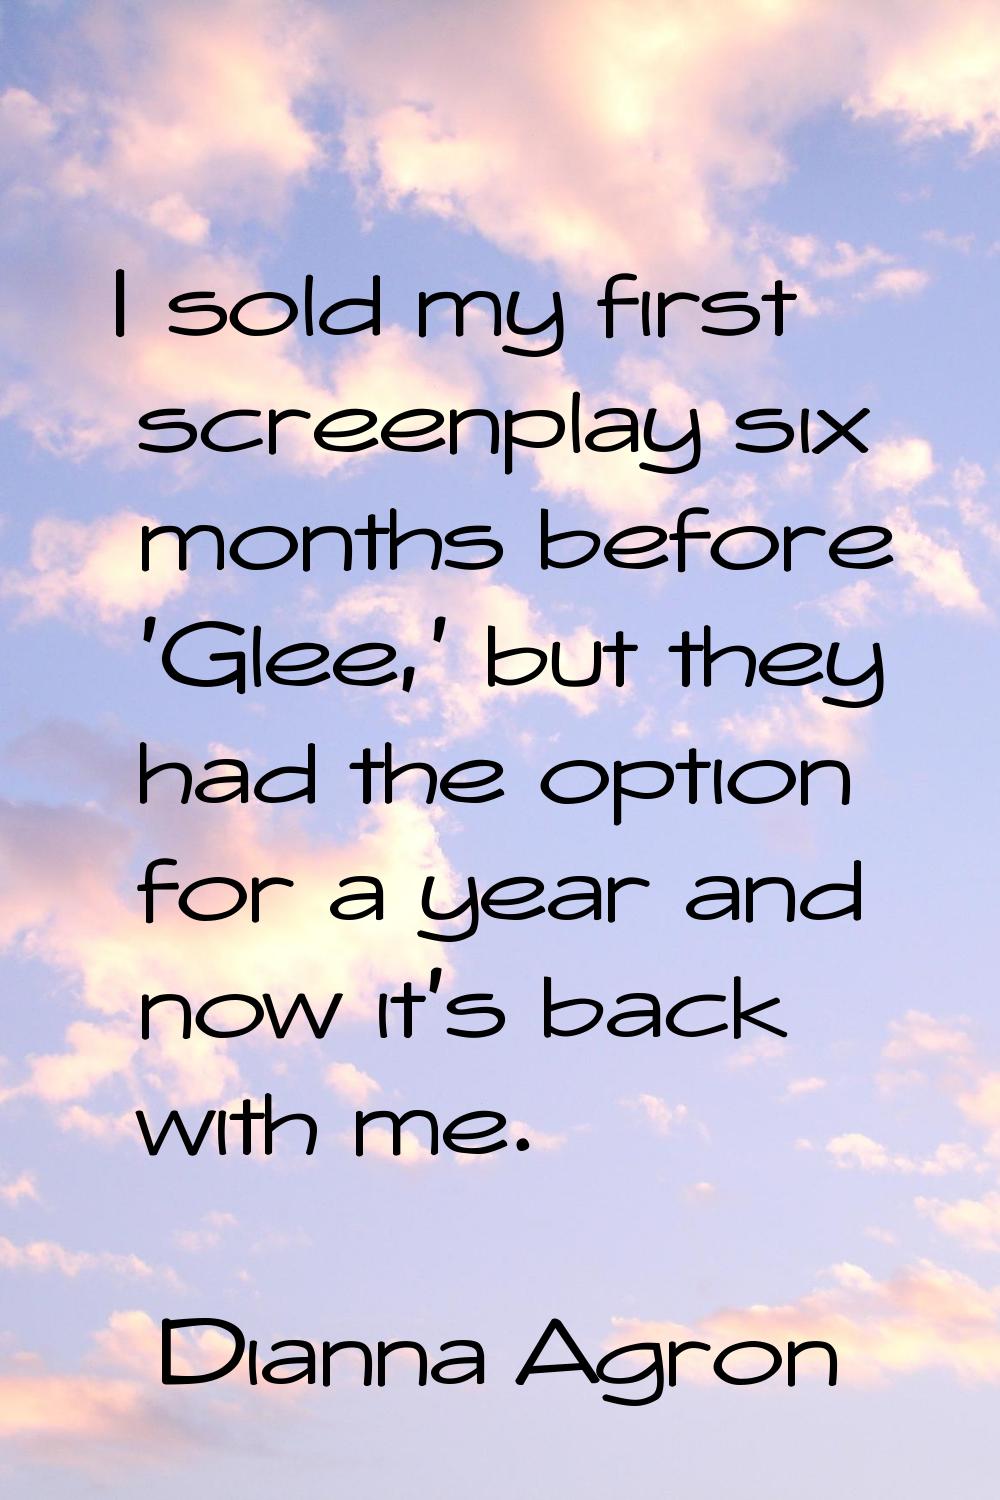 I sold my first screenplay six months before 'Glee,' but they had the option for a year and now it'